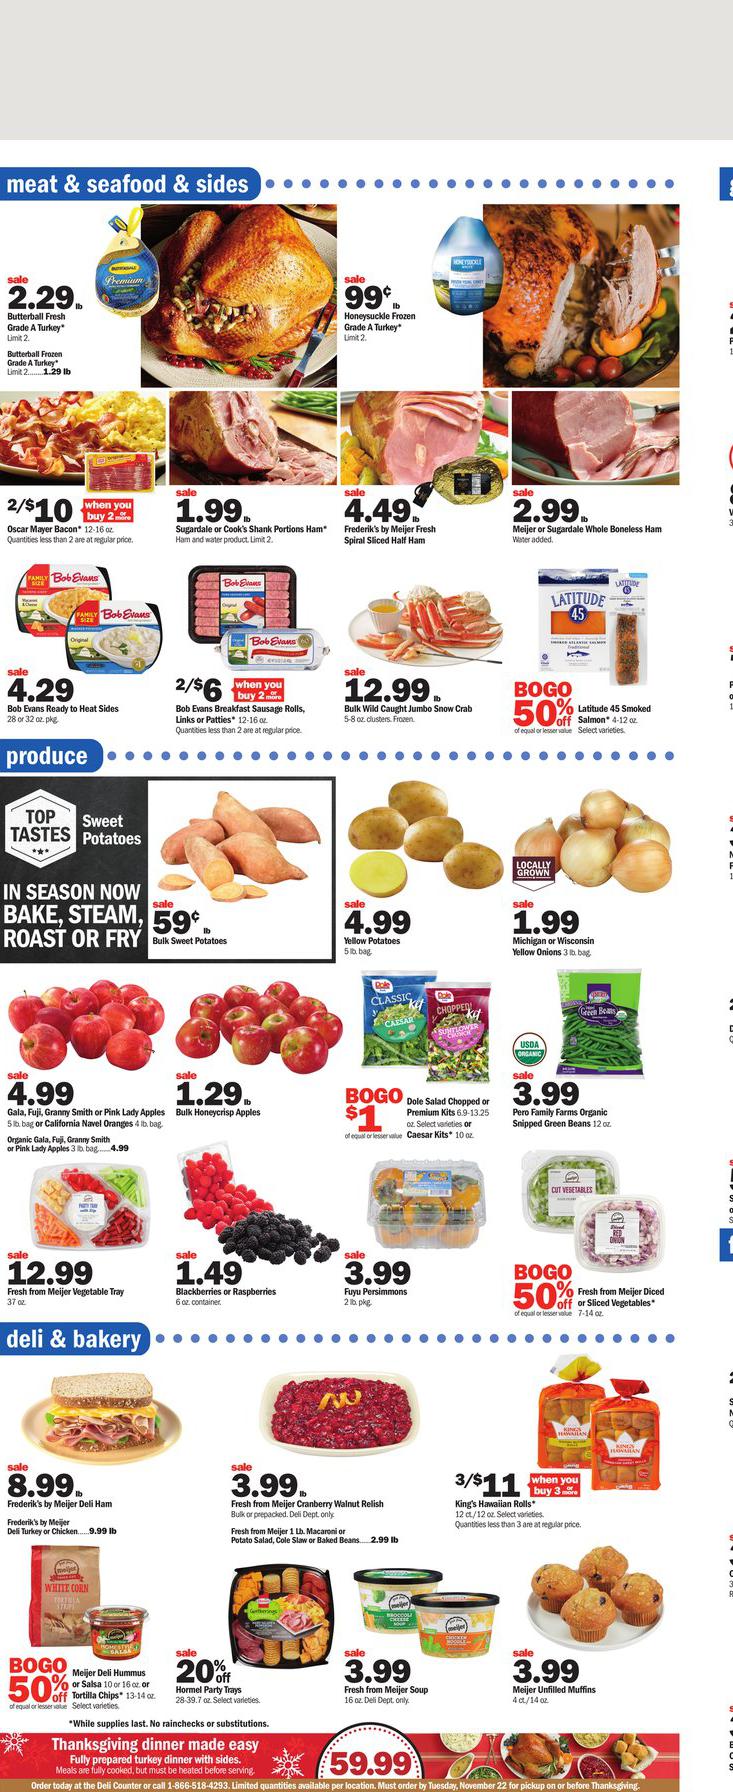 20.11.2022 Meijer ad 4. page